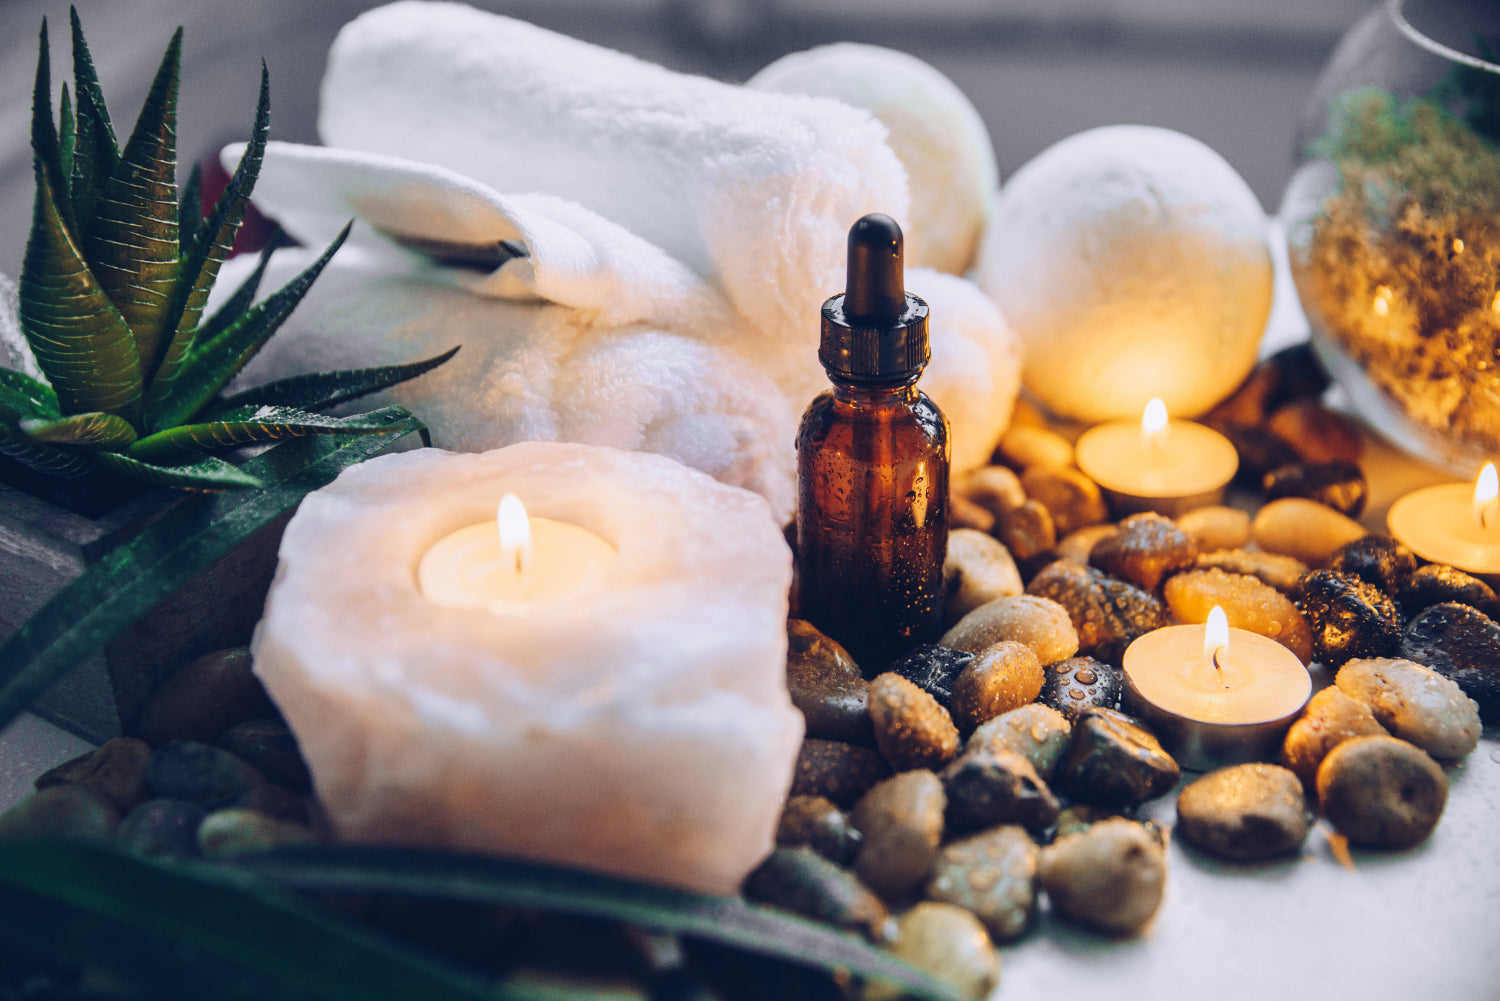 A tranquil array of bath products, oils, rocks, and candles